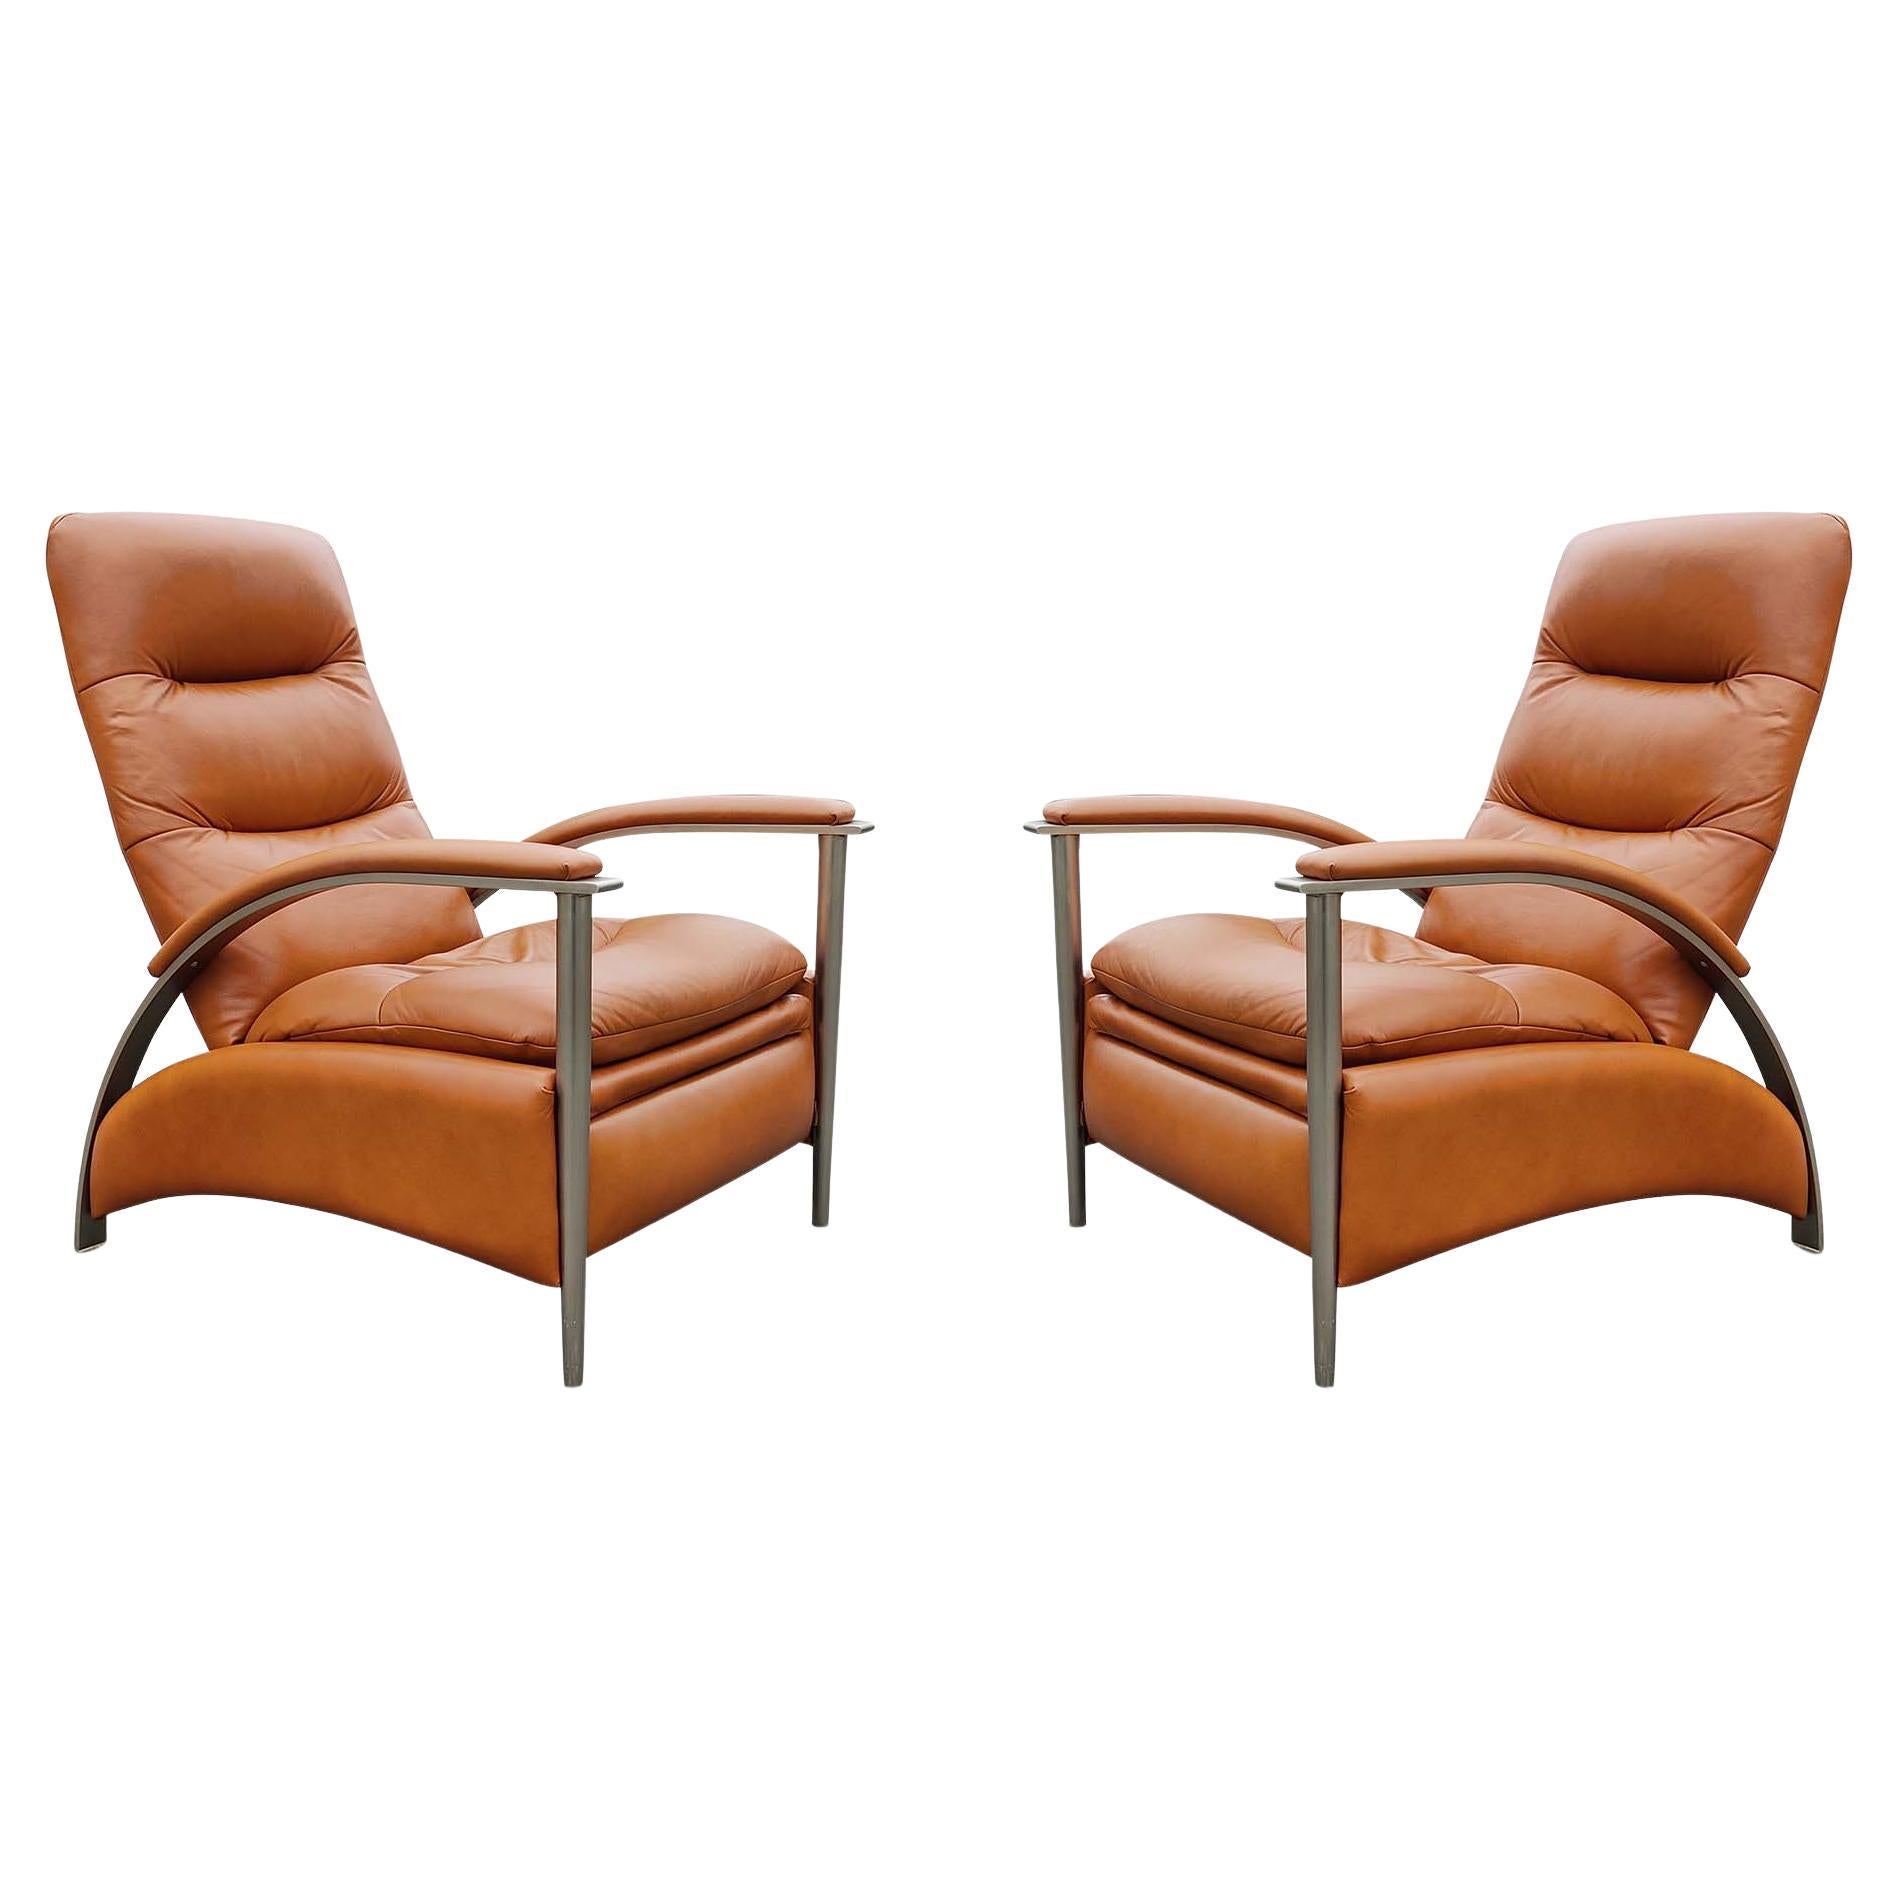 Milo Baughman Style Pair Orange Leather and Steel Recliners or Lounge Chairs